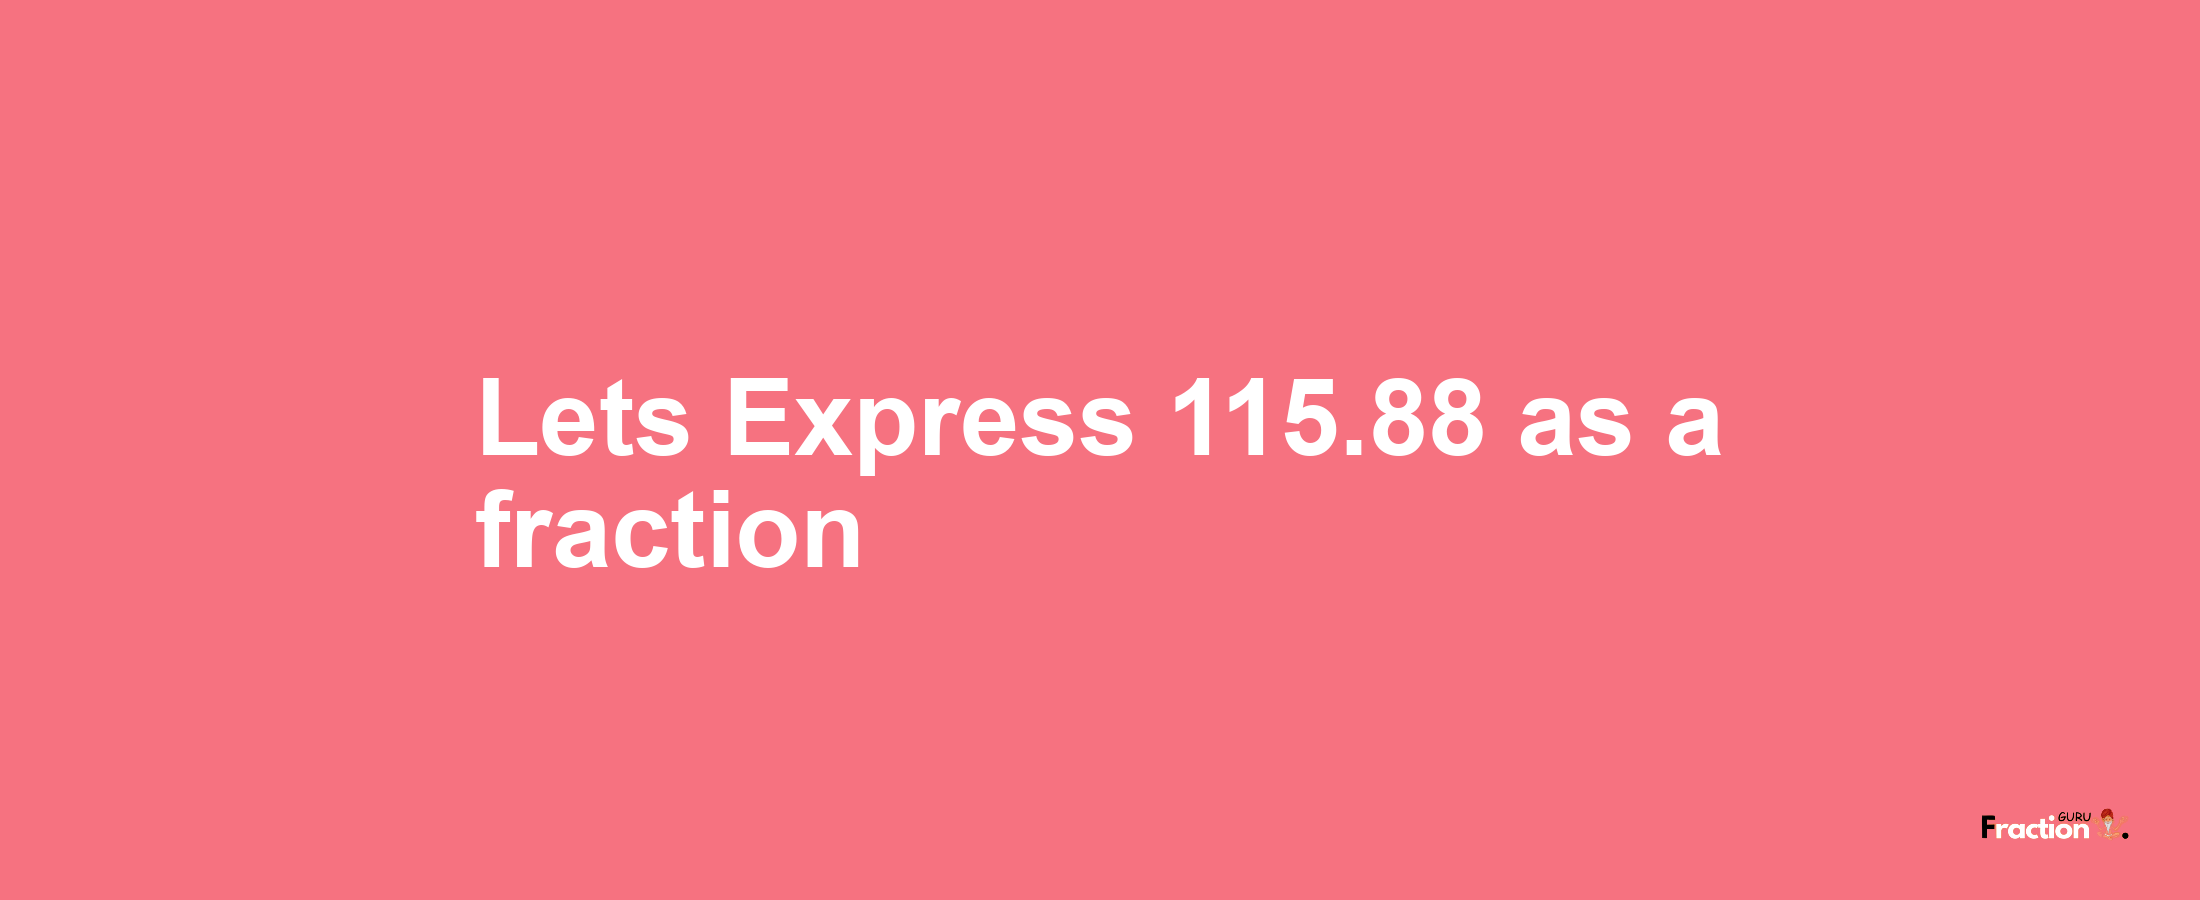 Lets Express 115.88 as afraction